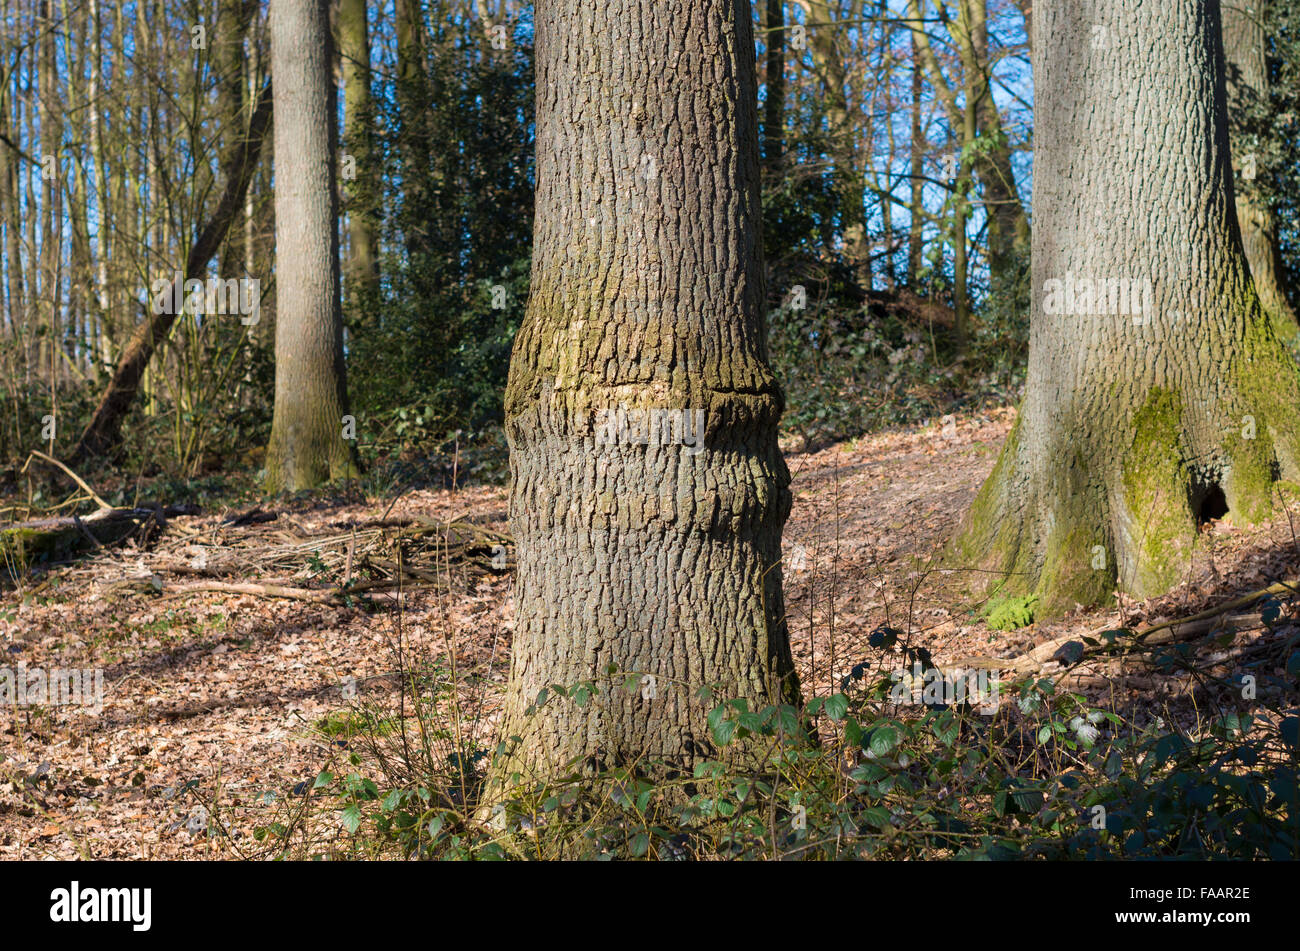 oak tree with trunk misshapen by barbed wire Stock Photo